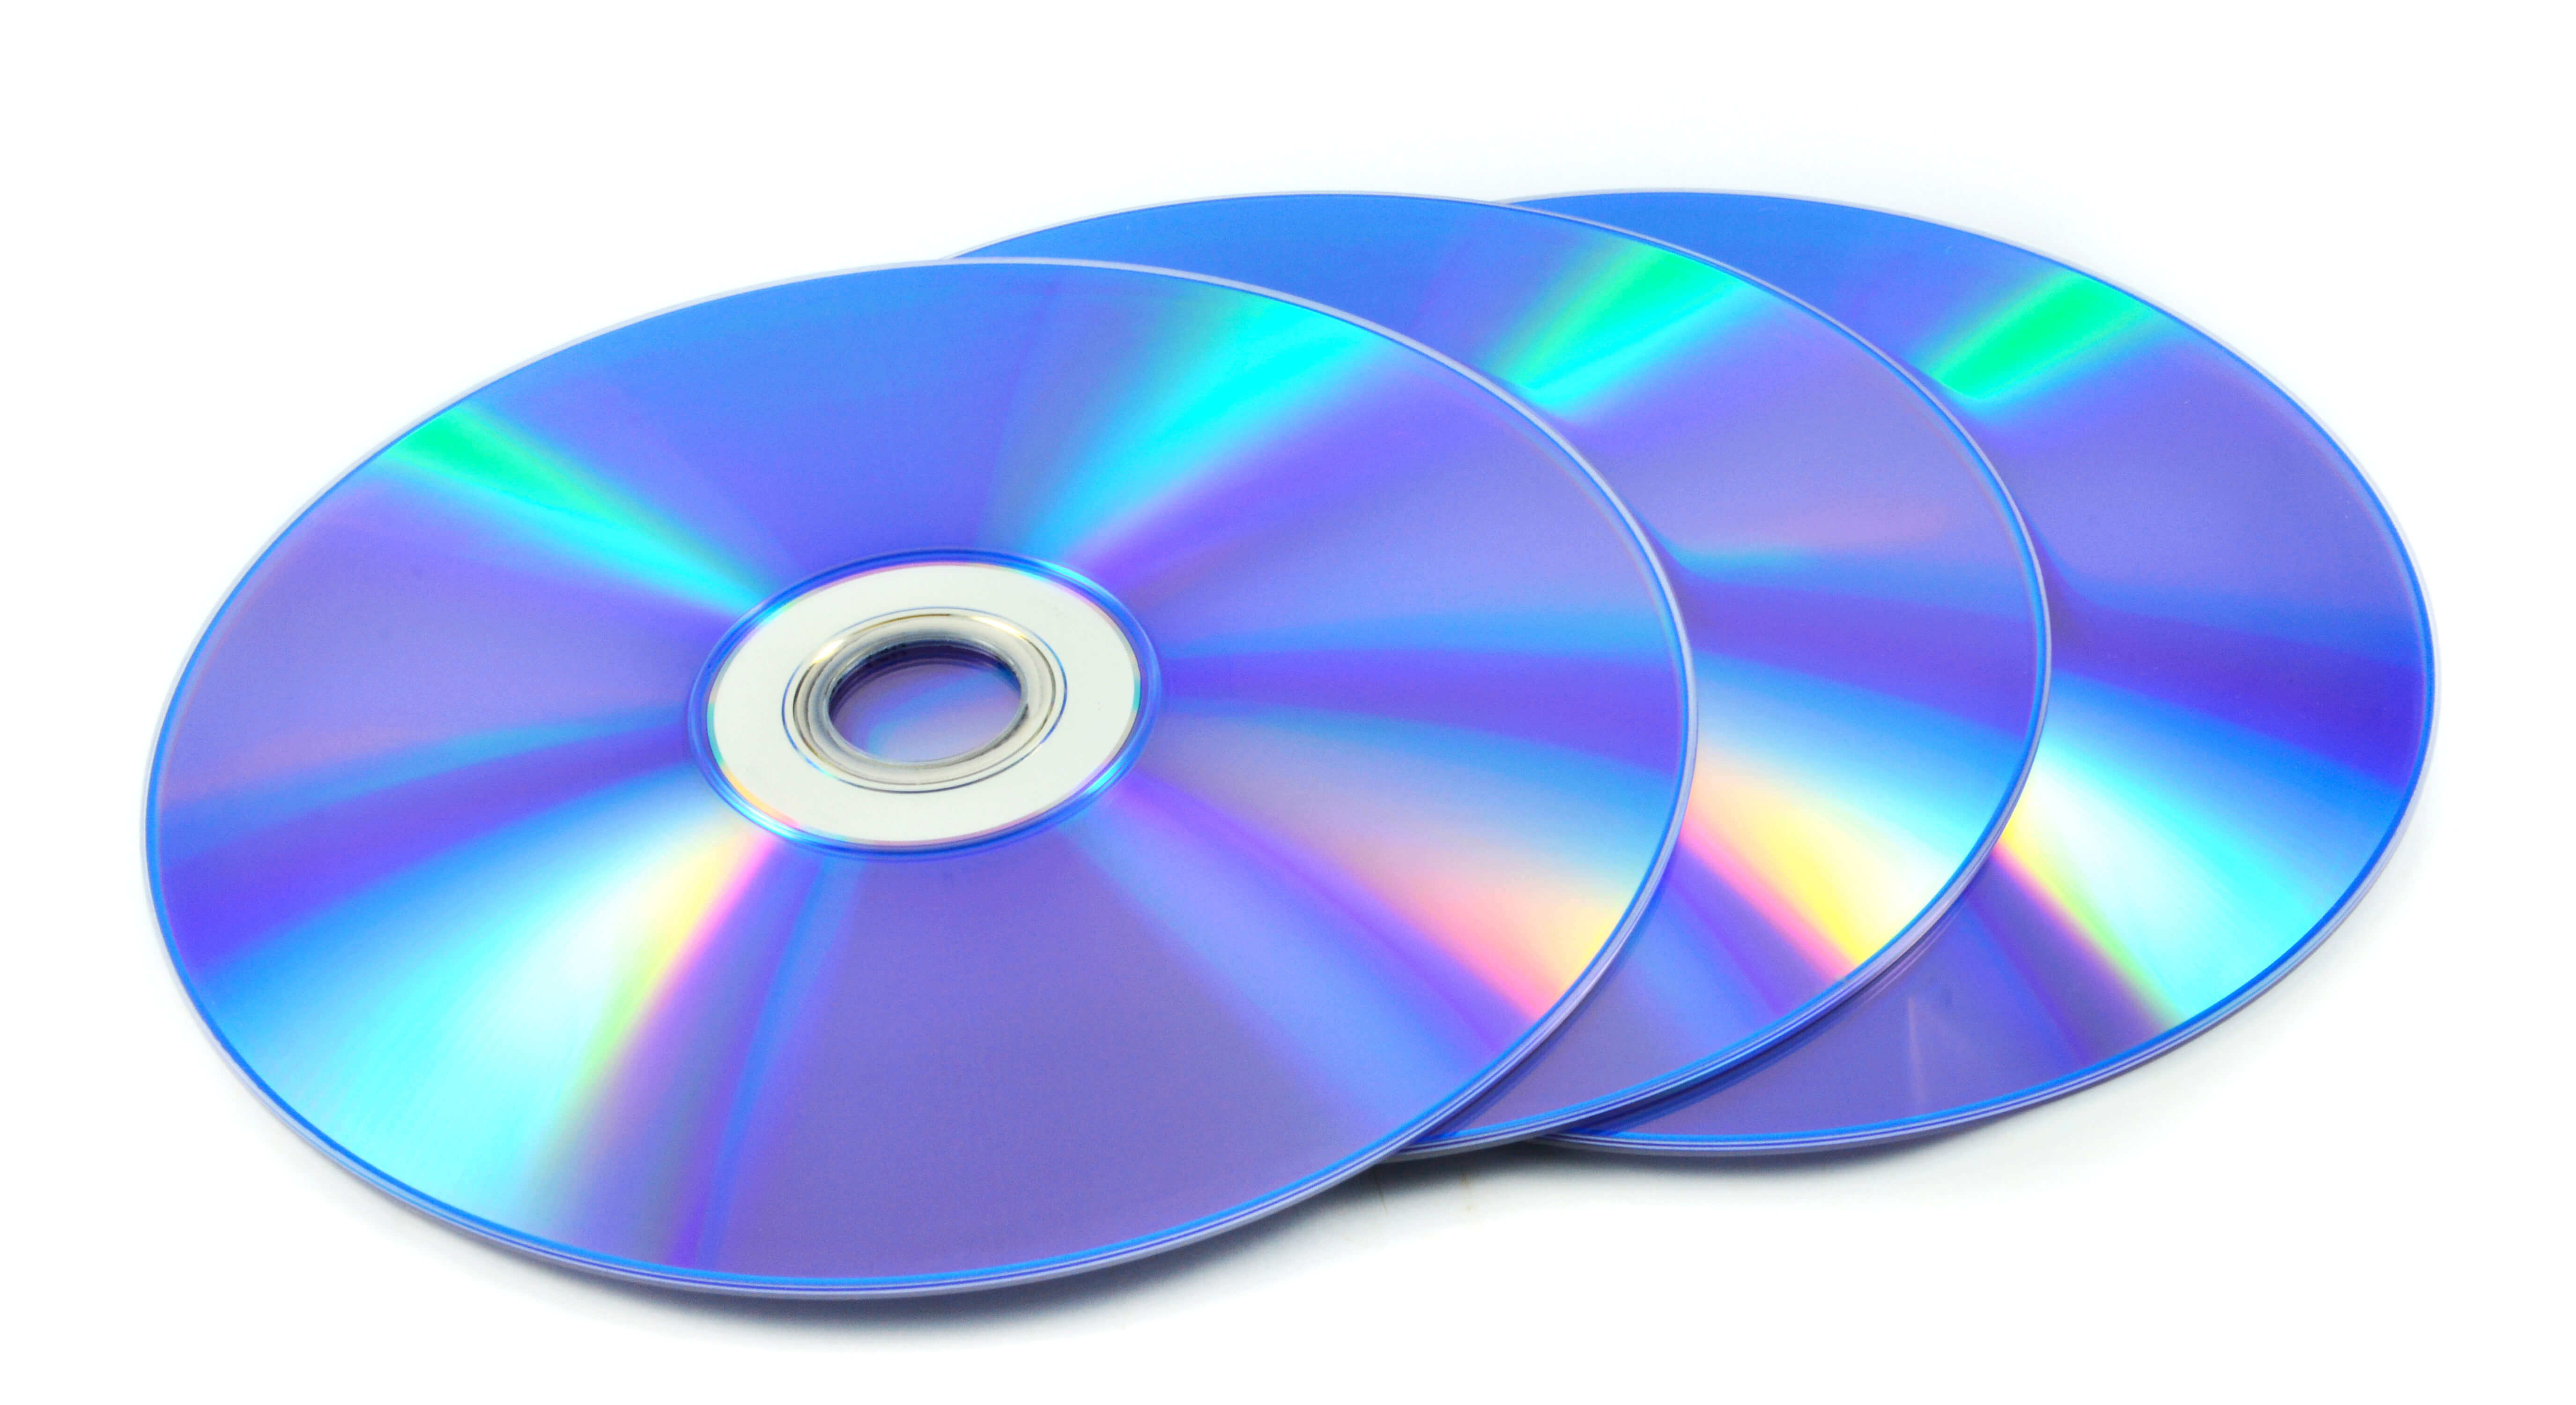 Blu-ray Definition - What is a Blu-ray disc?